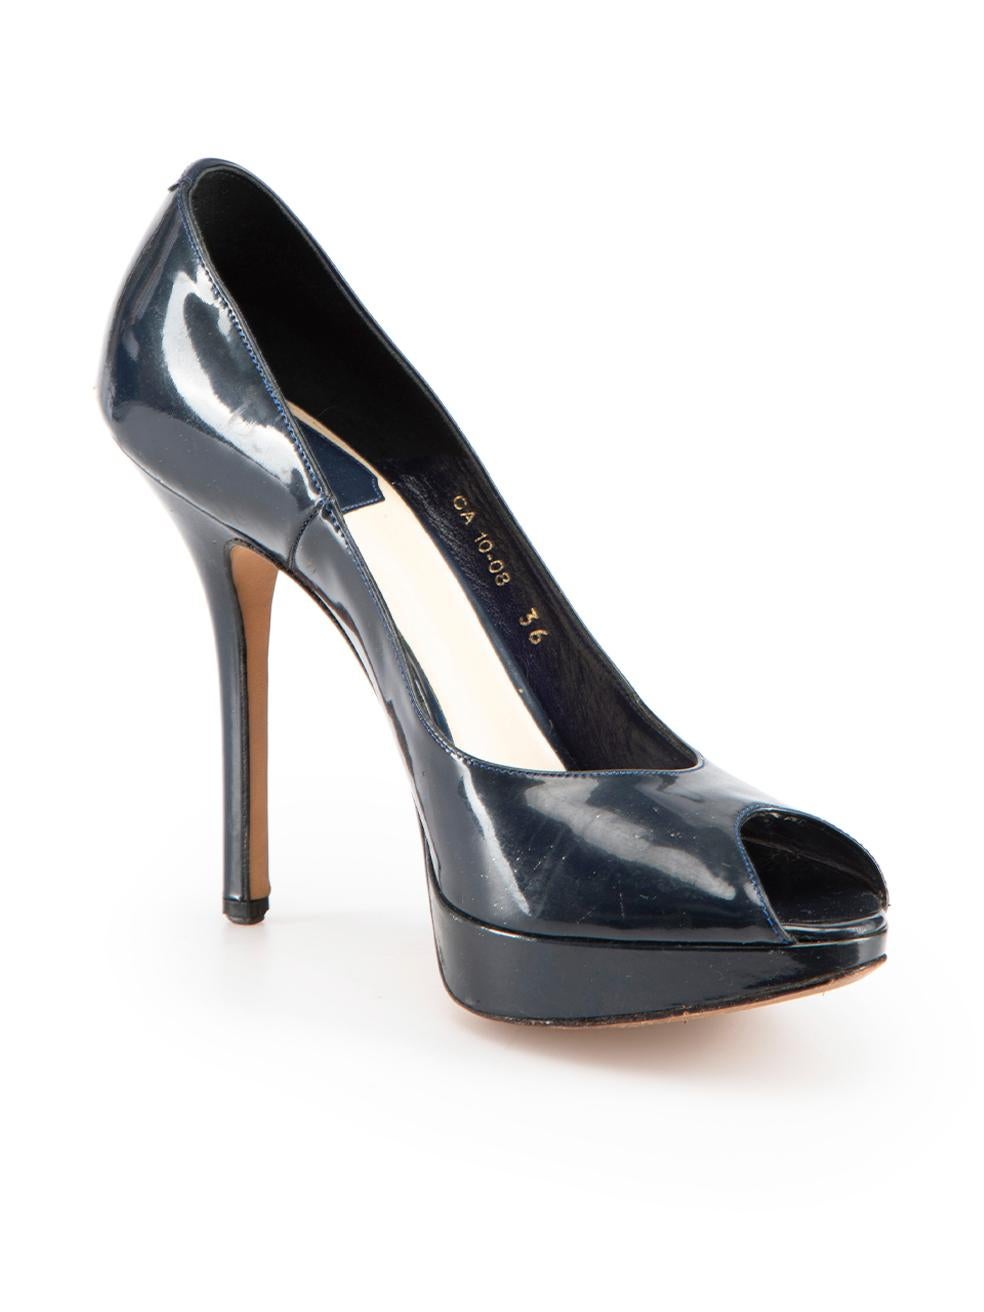 CONDITION is Good. General wear to heels is evident. Moderate signs of wear to overall leather with minor scuff marks and indentations over both heels on this used Dior designer resale item.
  
Details
Navy
Patent leather
Heels
Peep